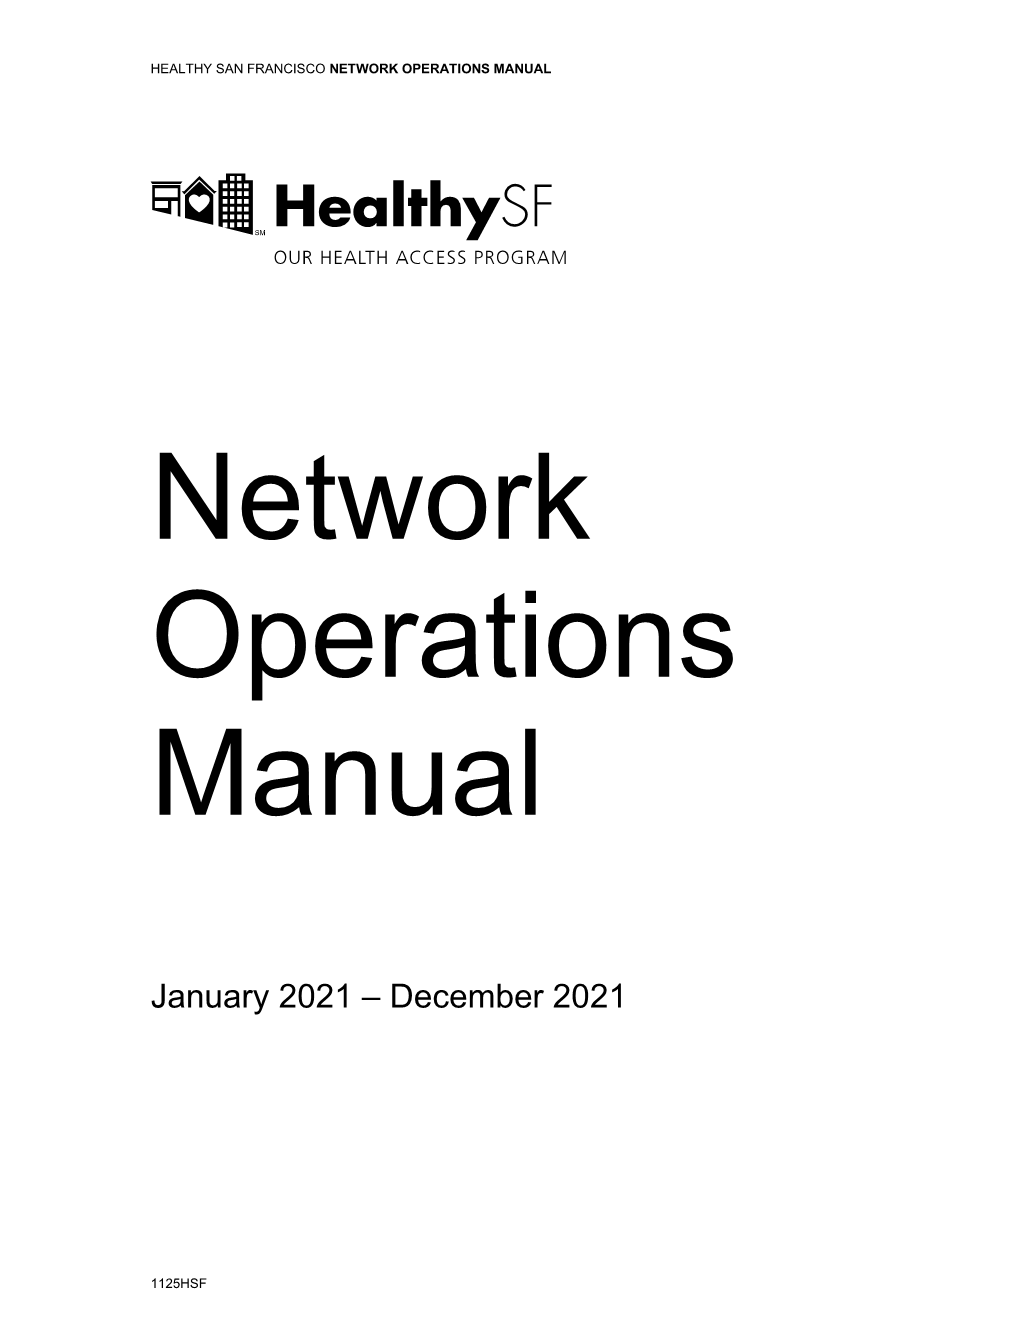 HSF Network Operations Manual